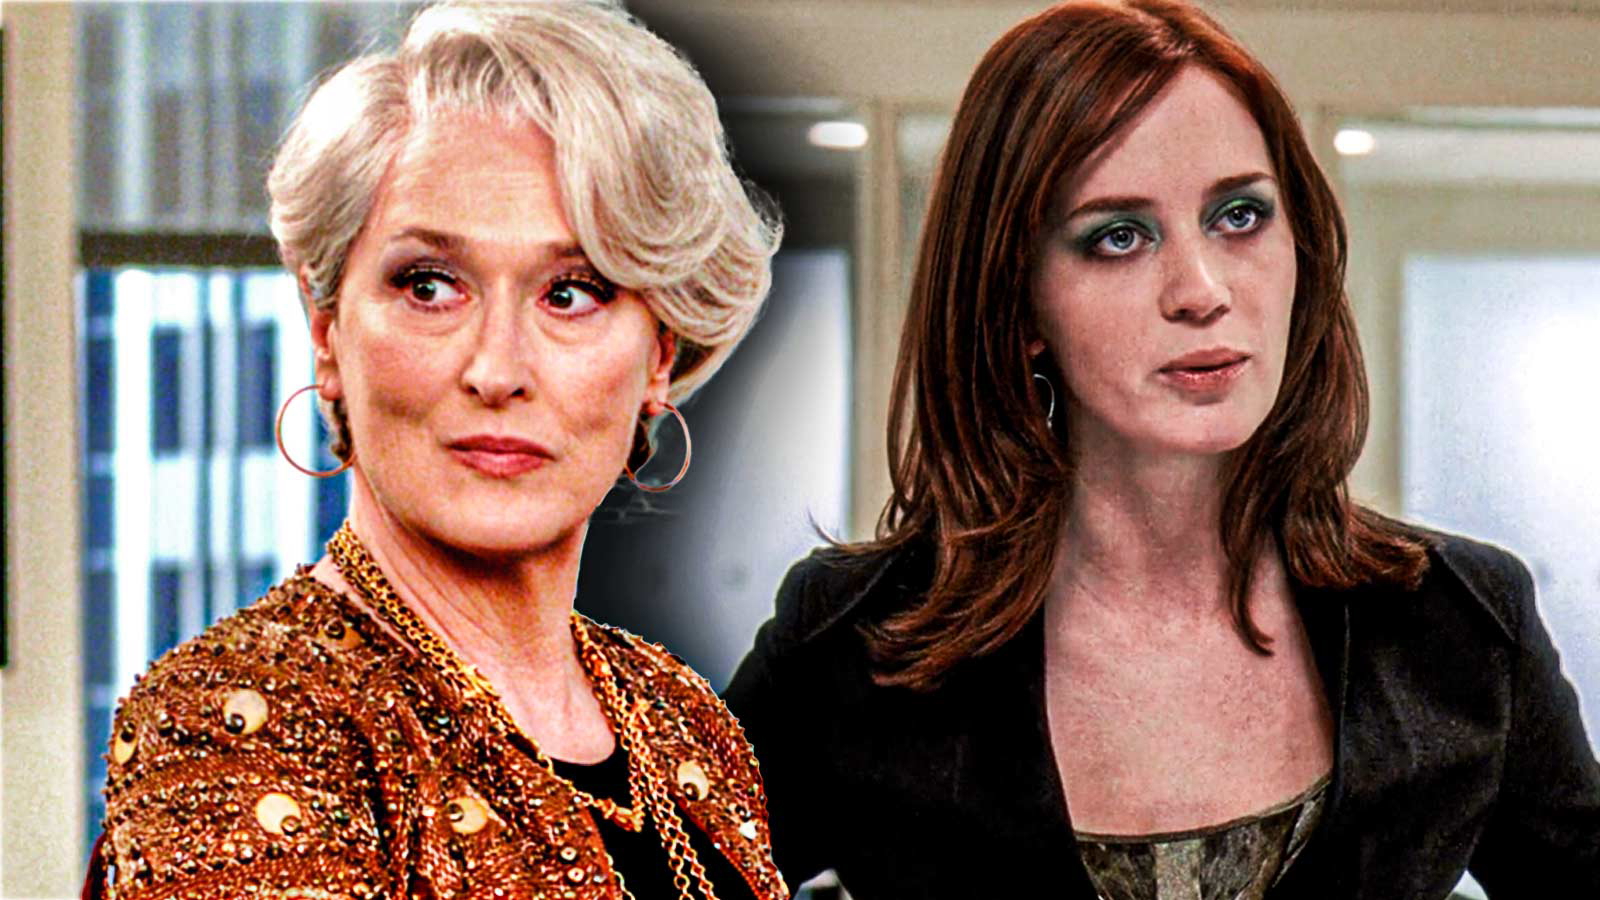 “There really is Evil in this World”: ‘The Devil Wears Prada’ Sequel Destroys a Legacy as Fans Scream Over Meryl Streep vs Emily Blunt Plot